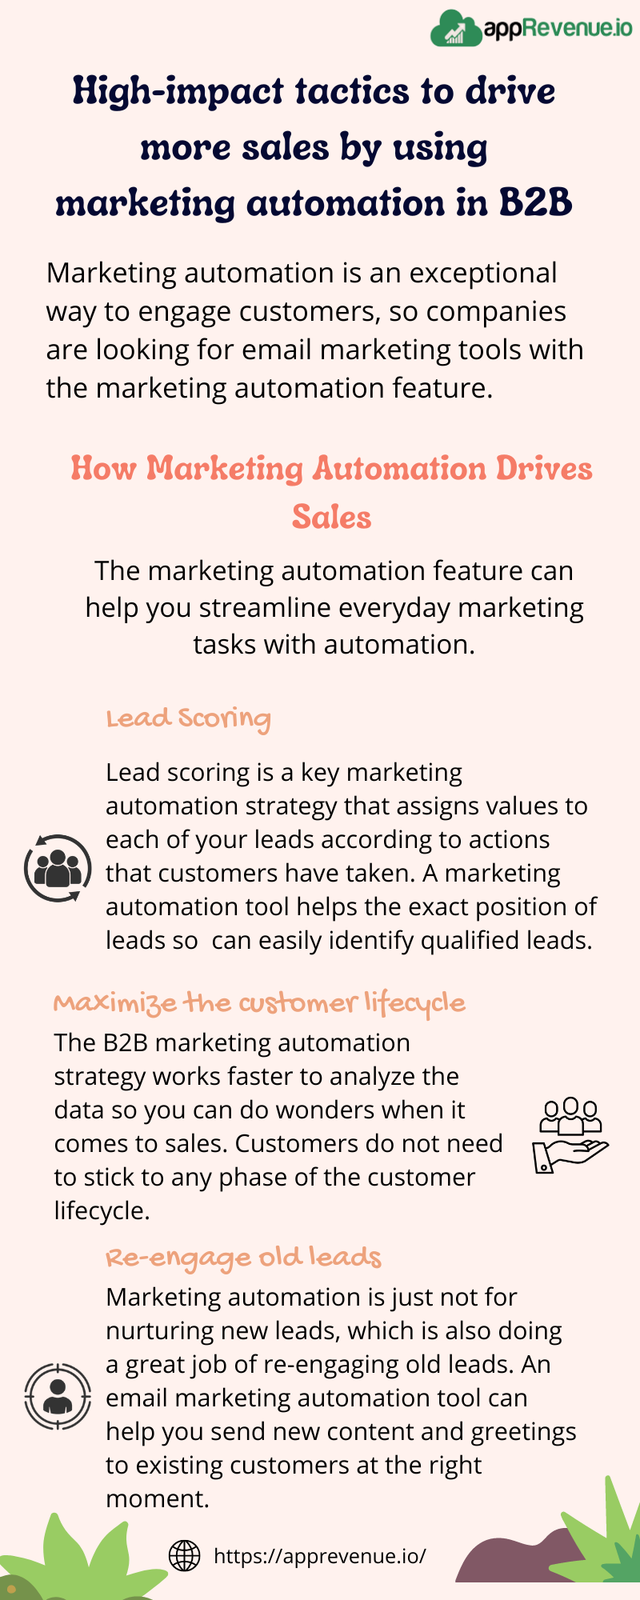   High-impact tactics to drive more sales by using marketing automation in B2B